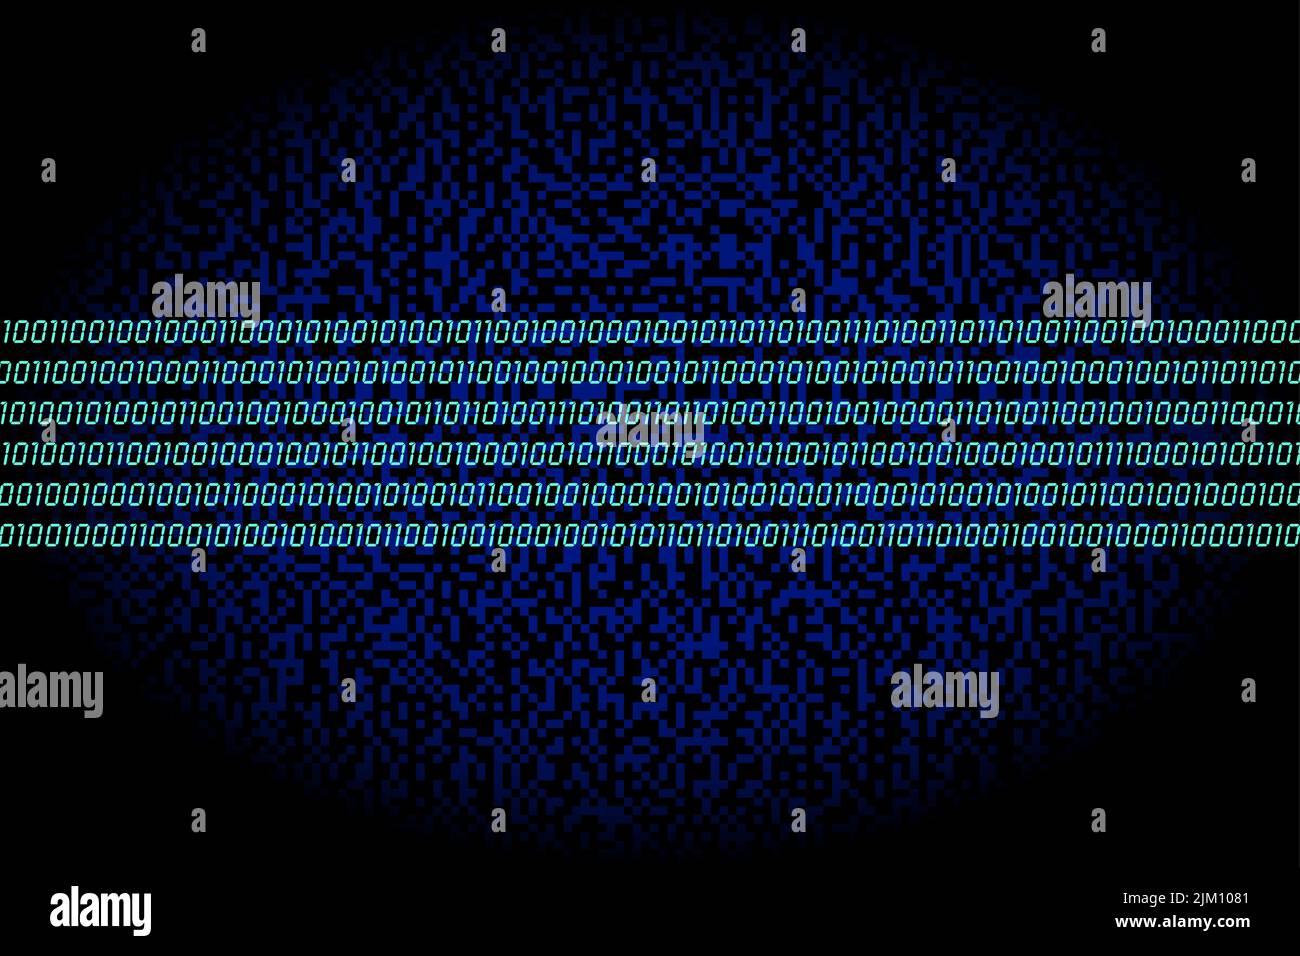 Data highway. Band of six turquoise rows consisting of zeros and ones, binary coding, over a dark blue background of randomly generated square dots. Stock Photo